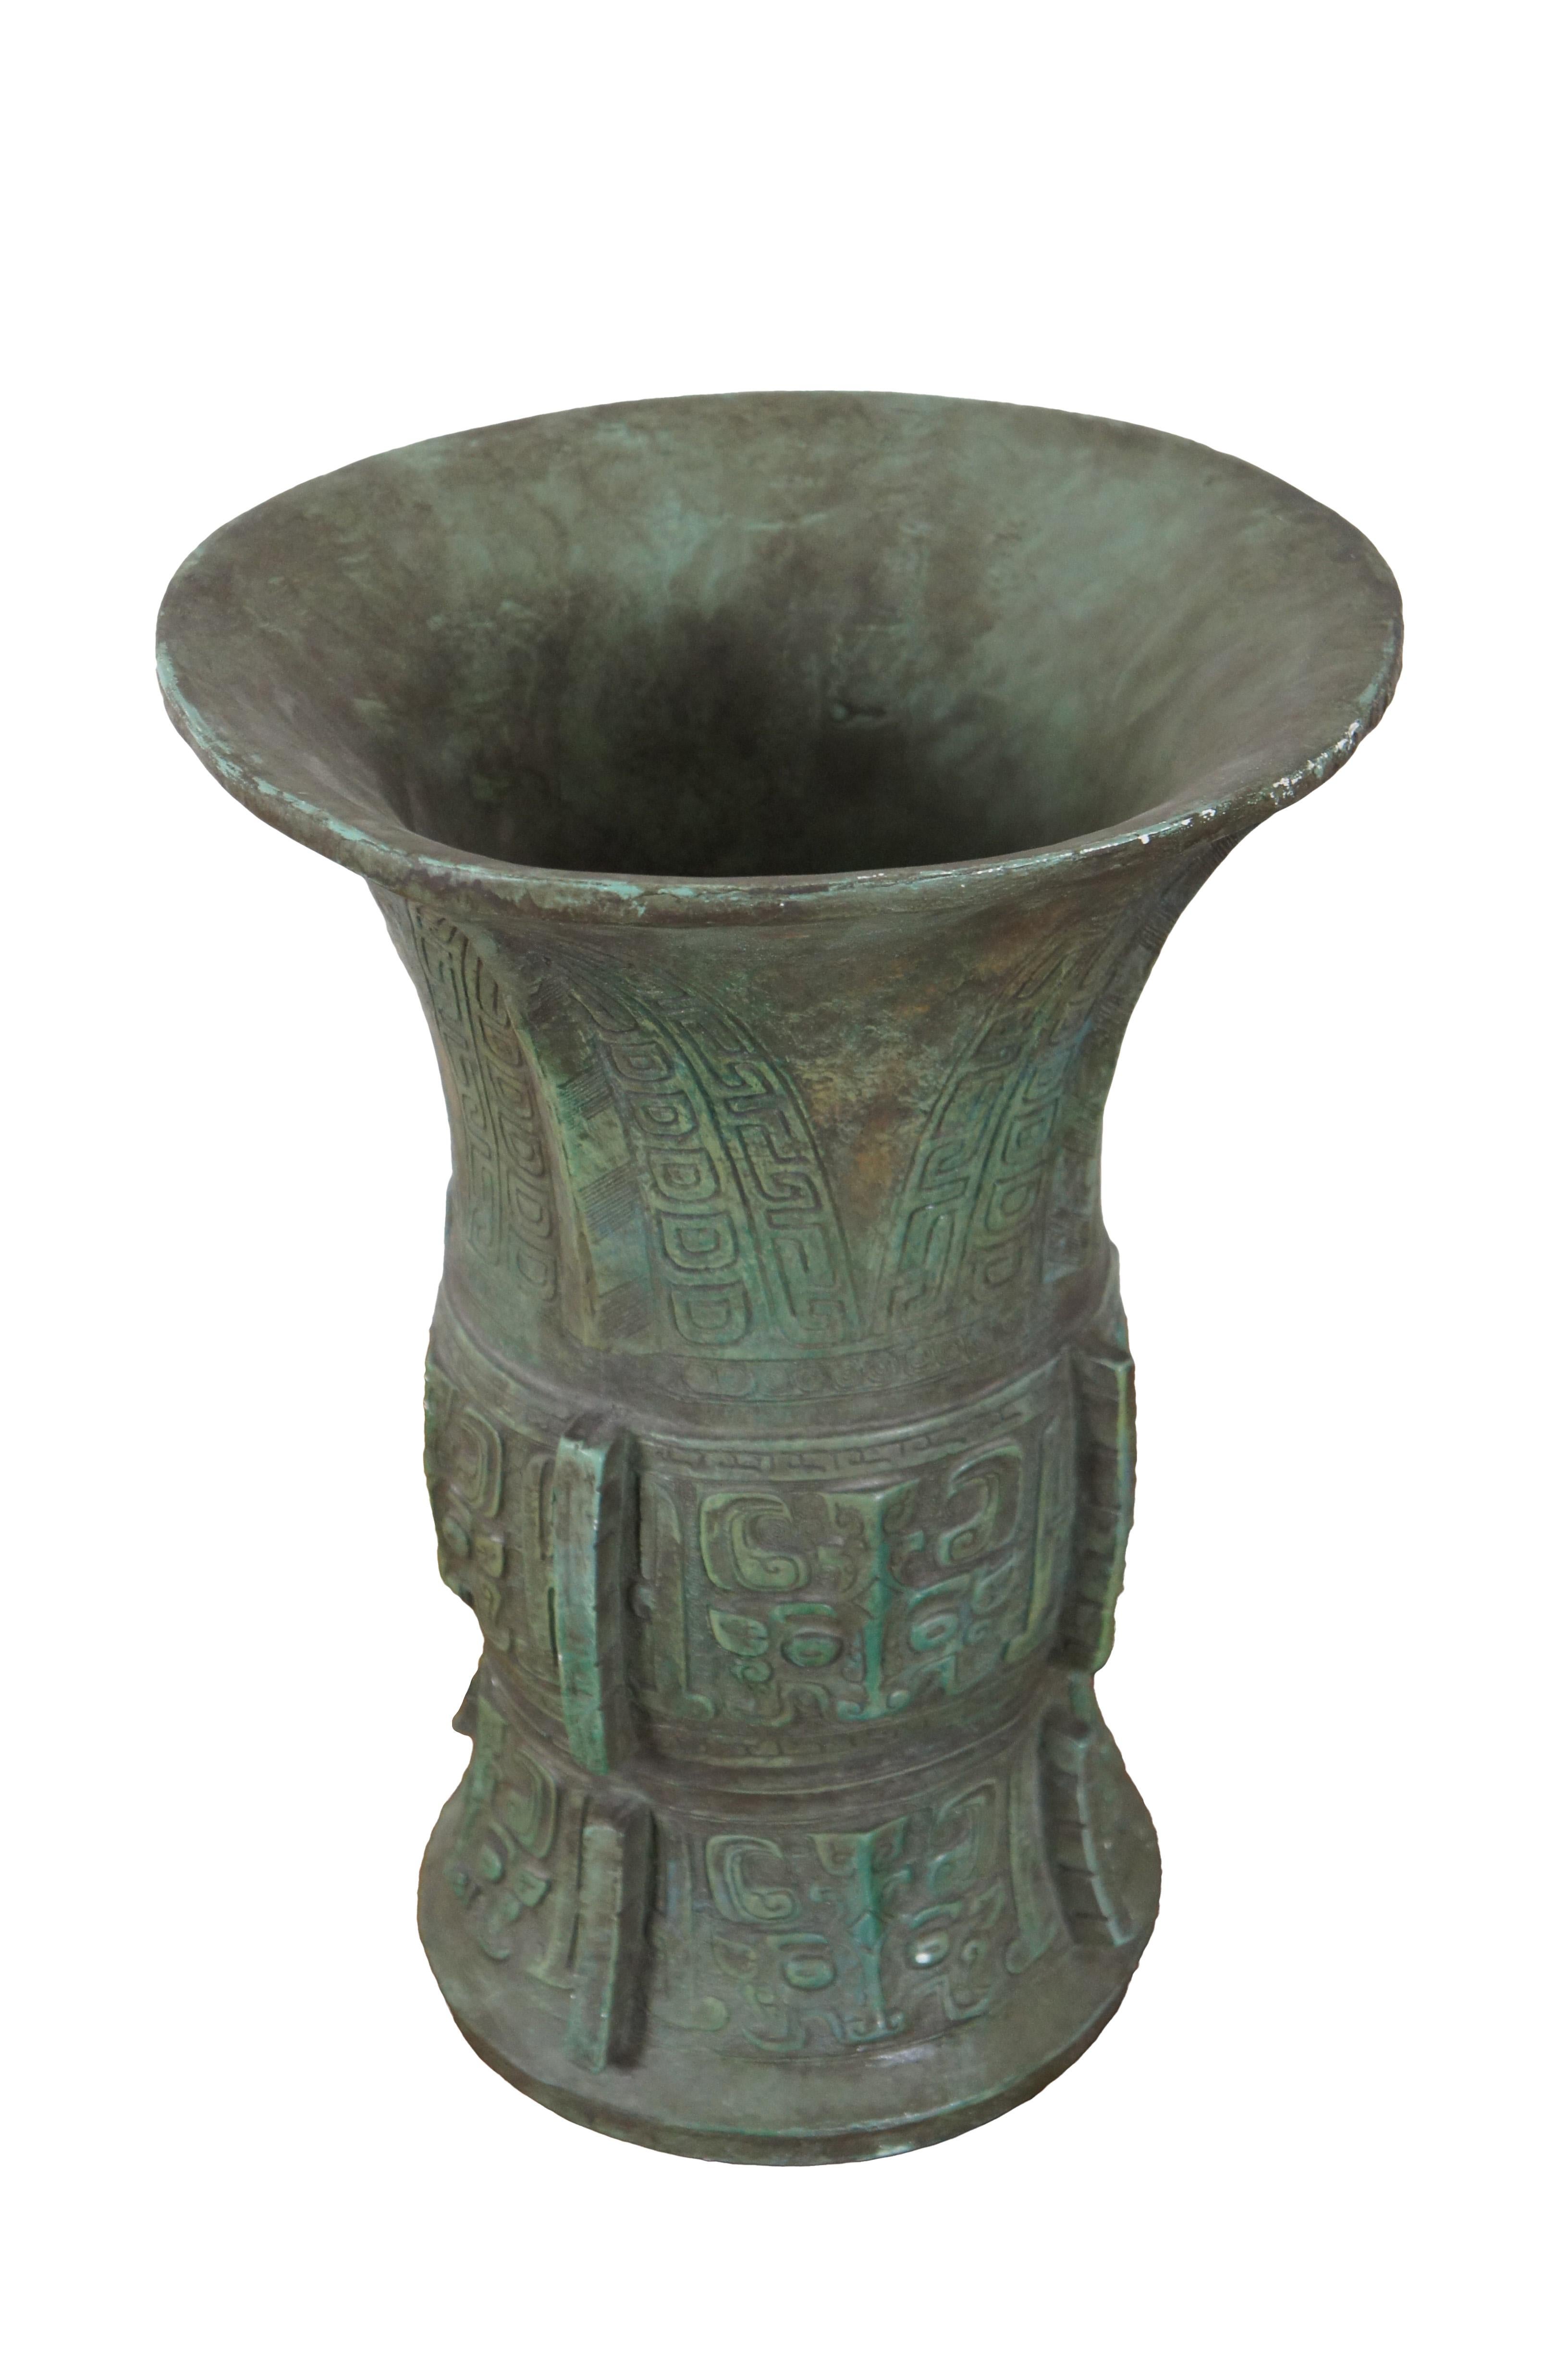 Vintage Alva 1981 museum replica vase made to resemble ancient Chinese or Mayan bronze vases / wine vessels. Crafted of chalkware and painted in green and brown, mimicking aged patina on metal.

Dimensions:
8.5” x 11.75” (Diameter x Height)